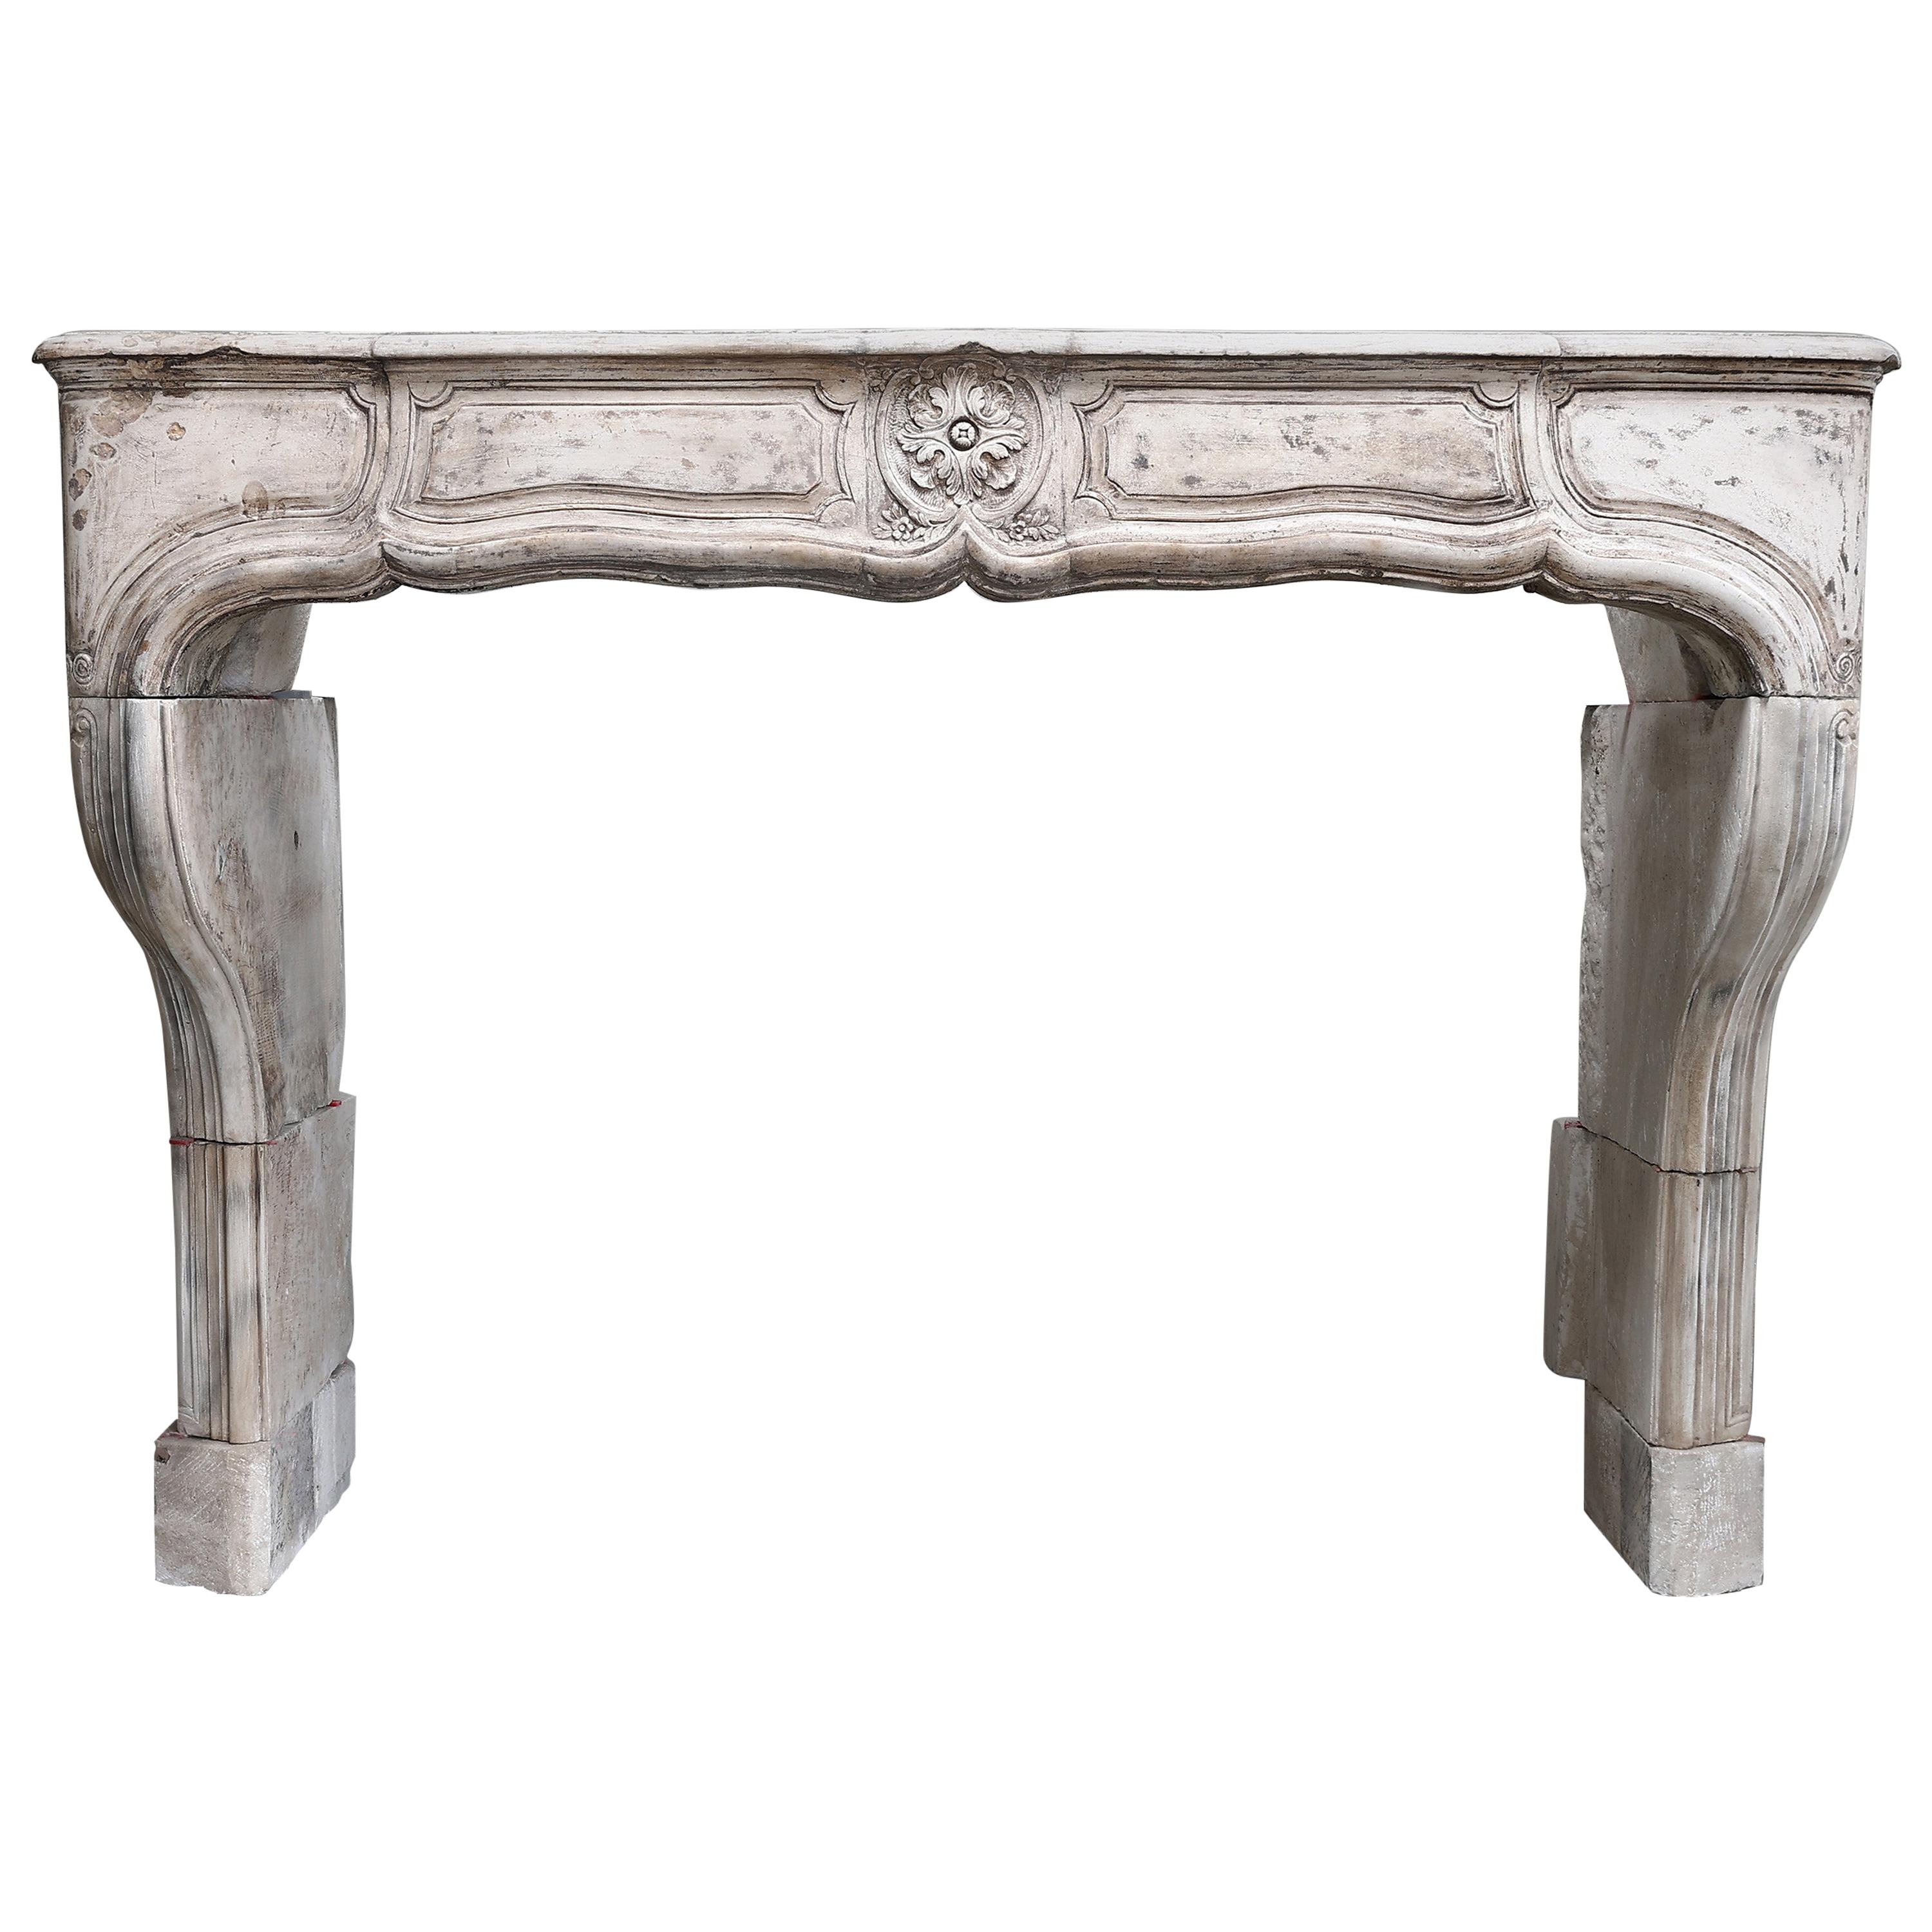 19th Century Limestone Fireplace Mantel from France